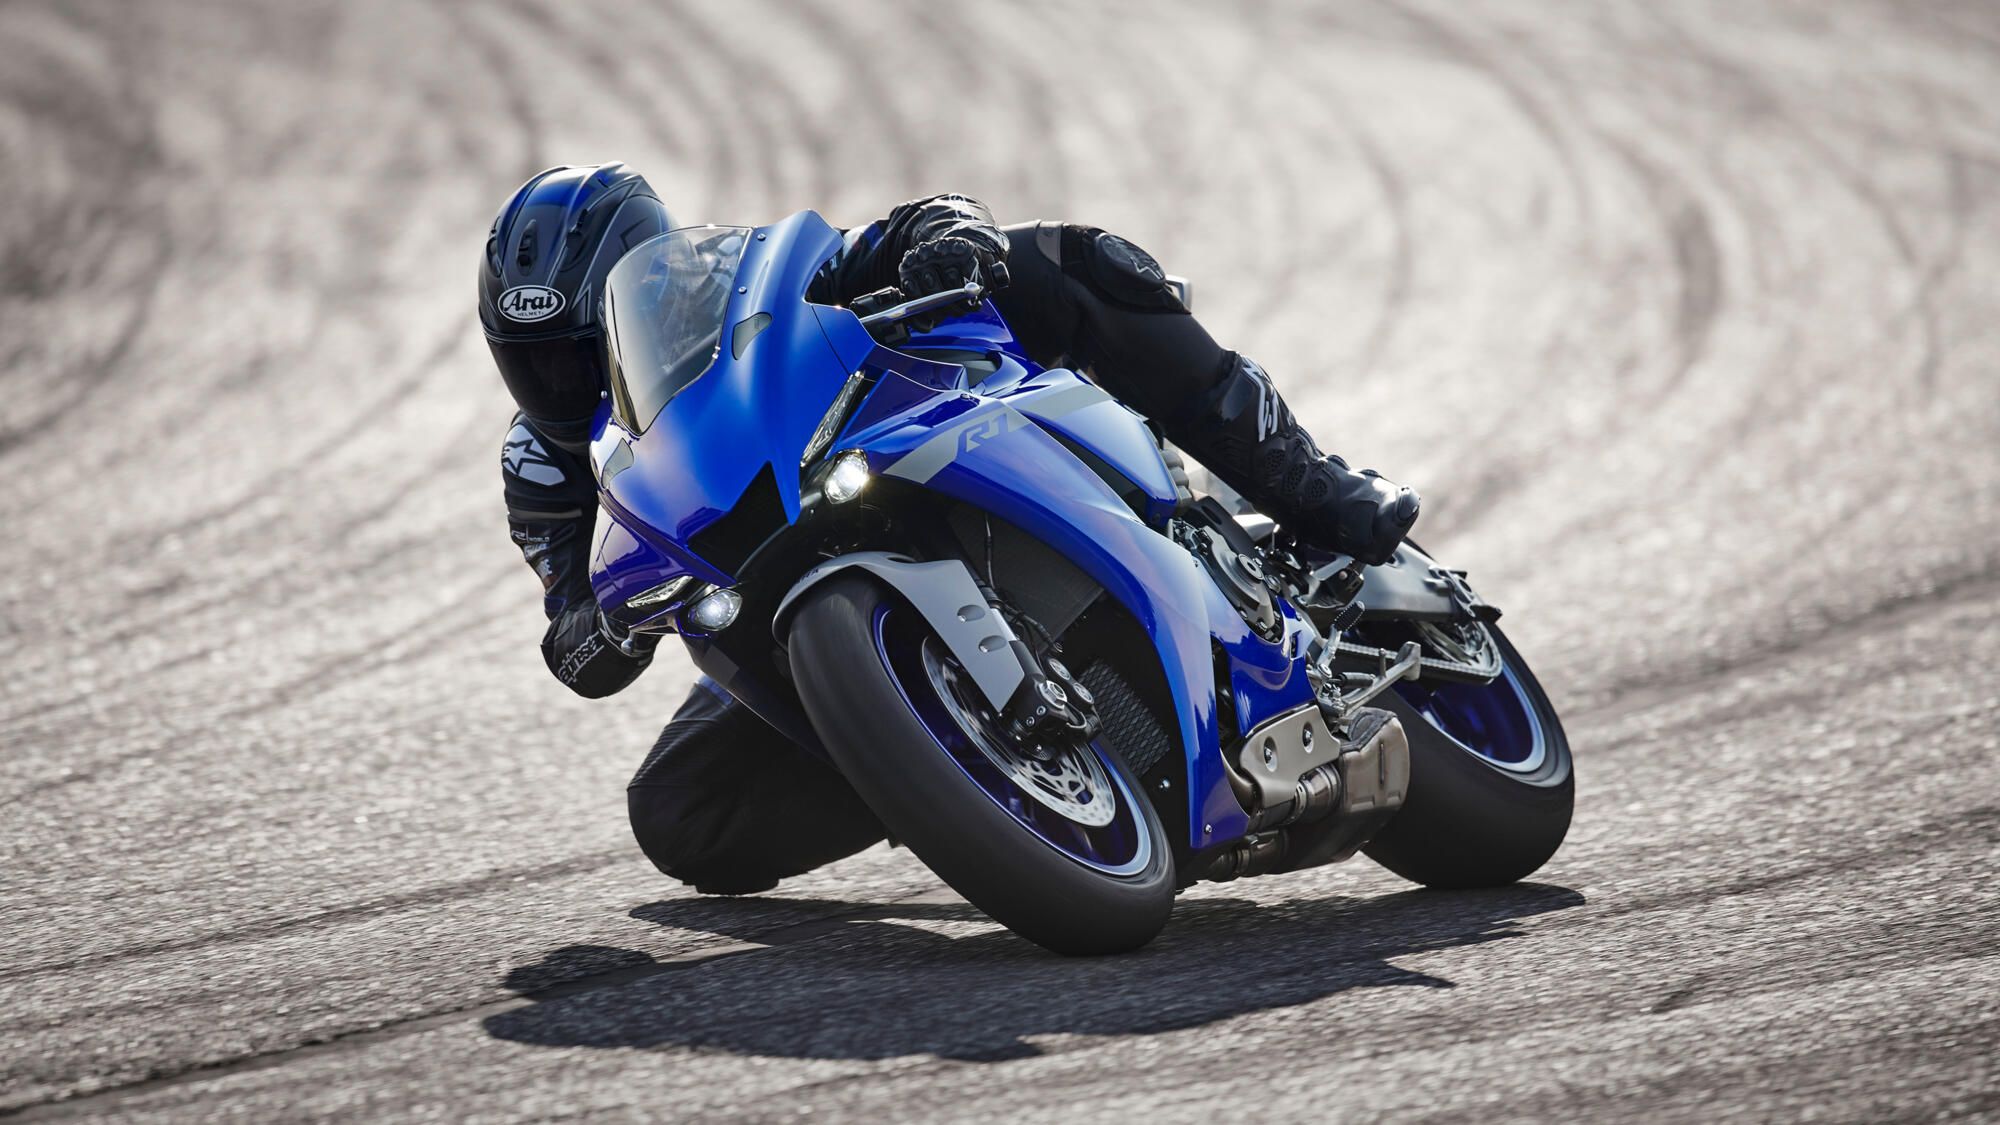 10 Of The Most Reliable Superbikes (& 10 To Completely Avoid)